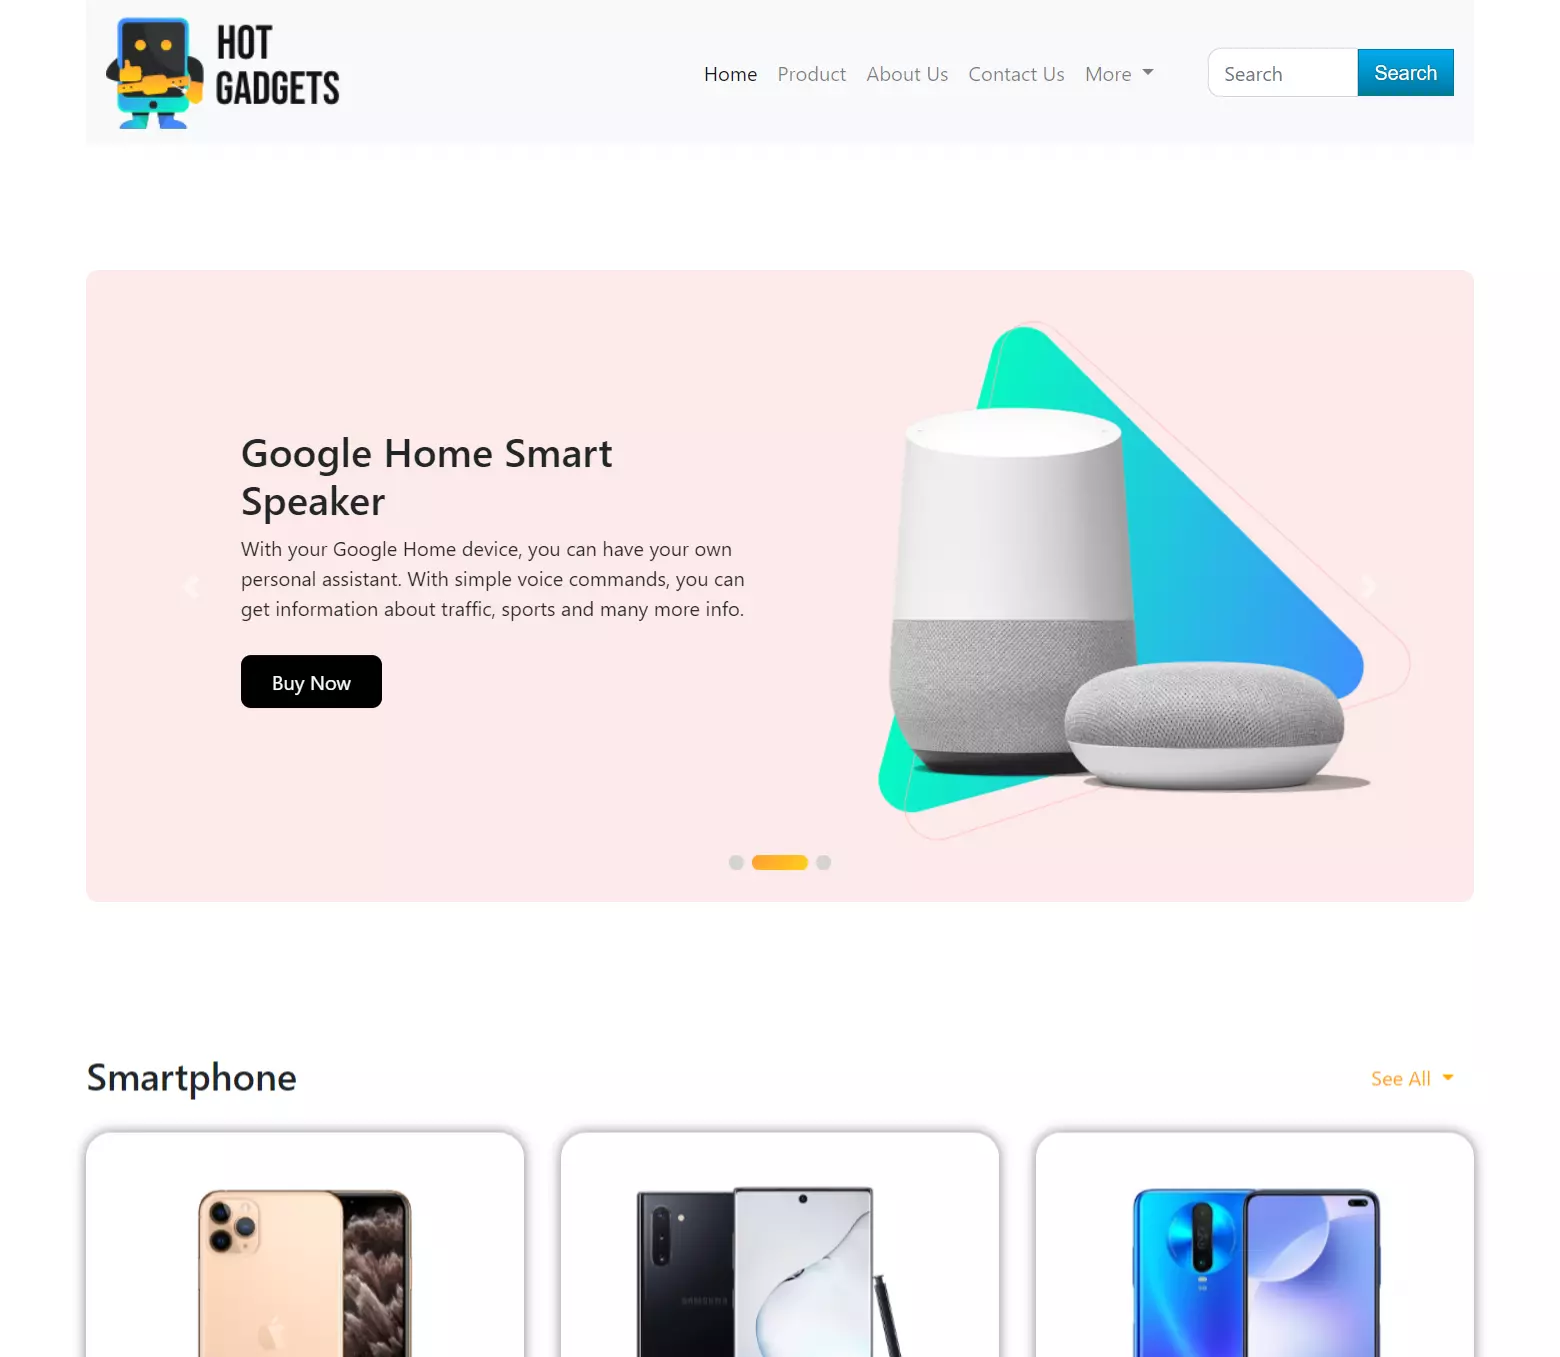 hot gadgets landing page project